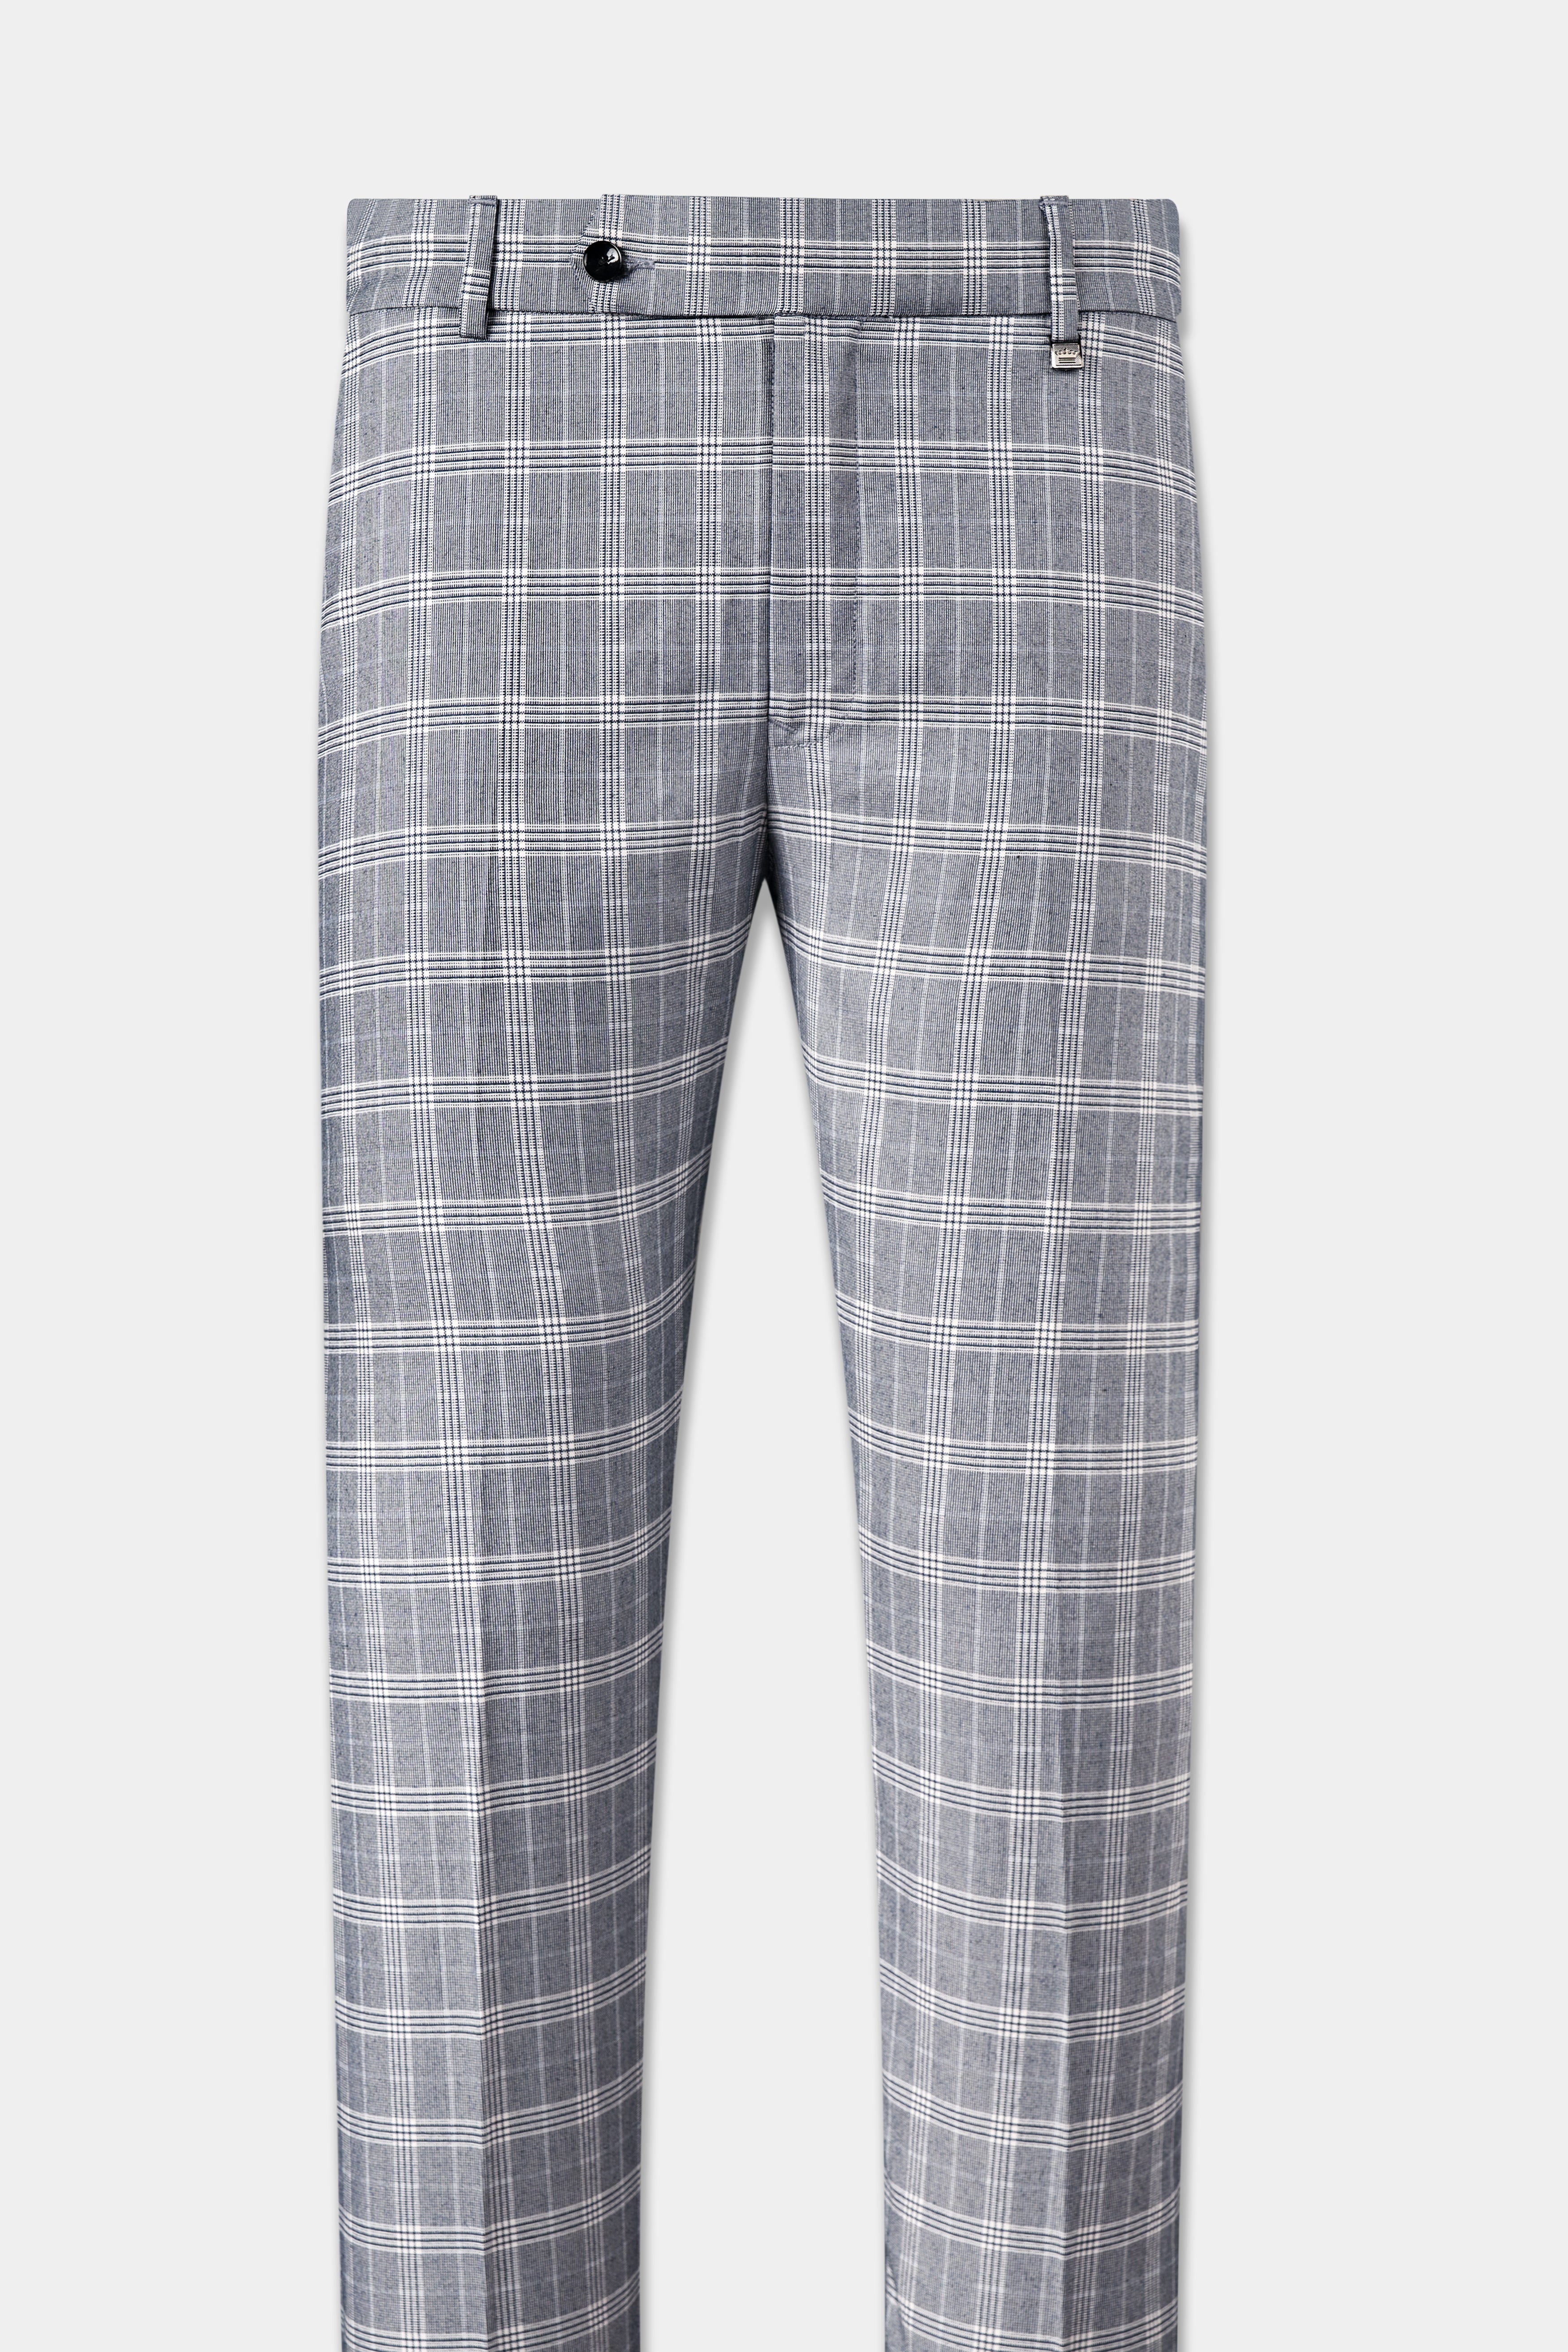 Monsoon Gray Plaid Double-Breasted Suit